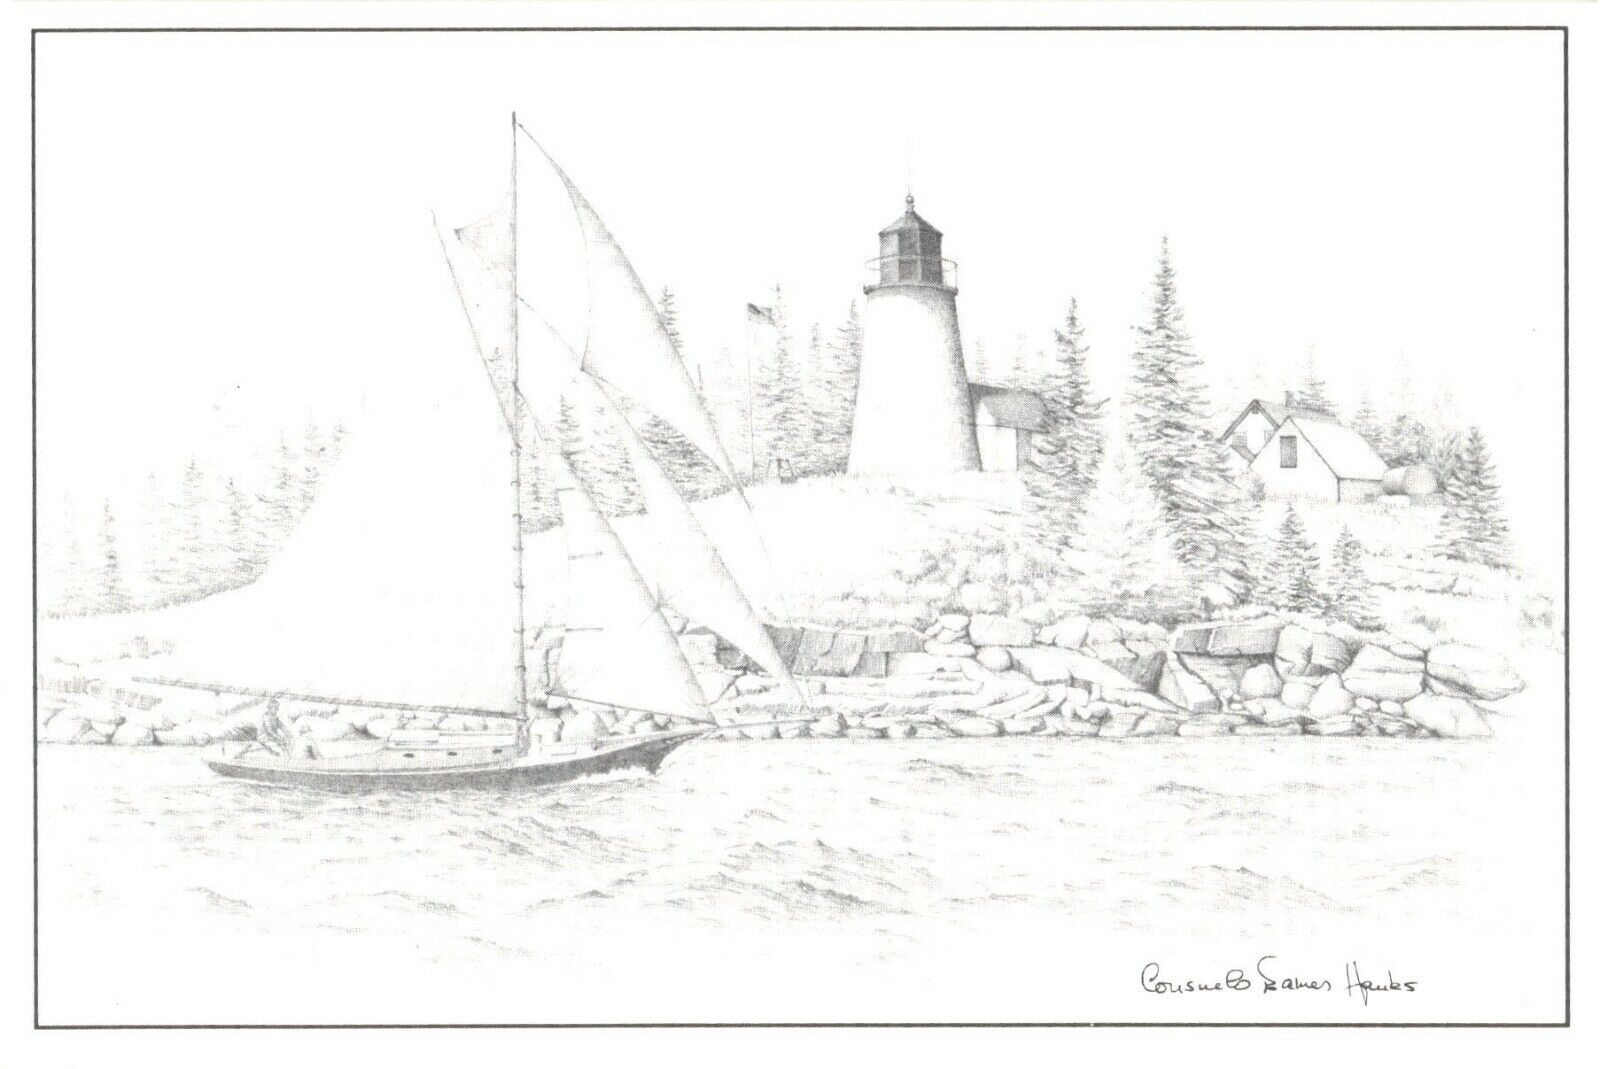 Portland Head Light Lighthouse In Maine Drawing By Consuelo Eames Hanks Postcard